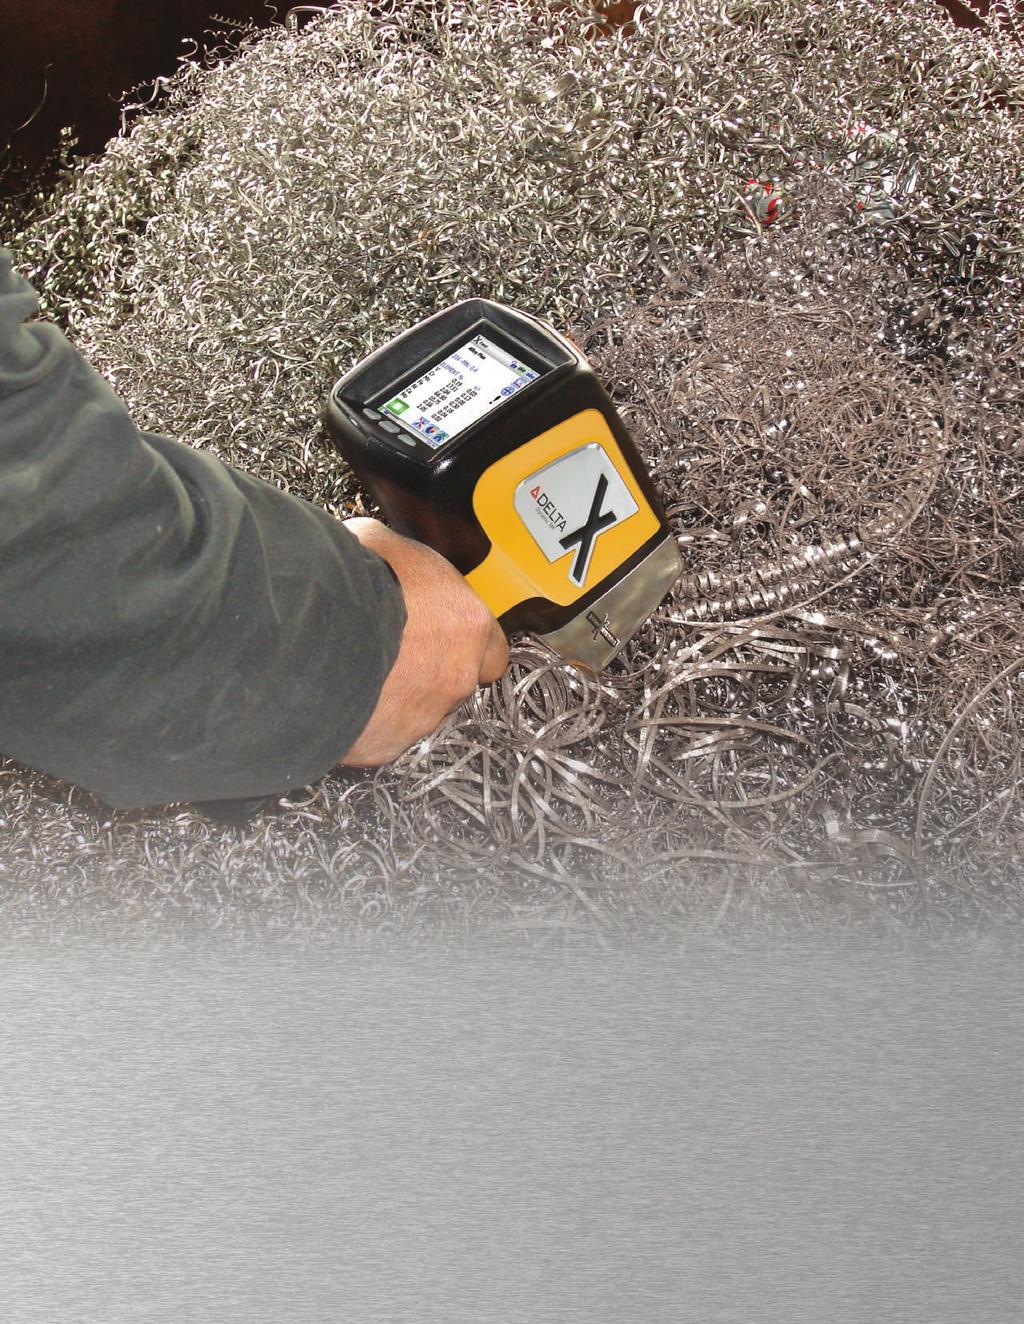 The Delta Line A New Breed of Rugged, High Performance Handheld XRF You can see and feel the difference at the outset compact and robust from probe to trigger to display.